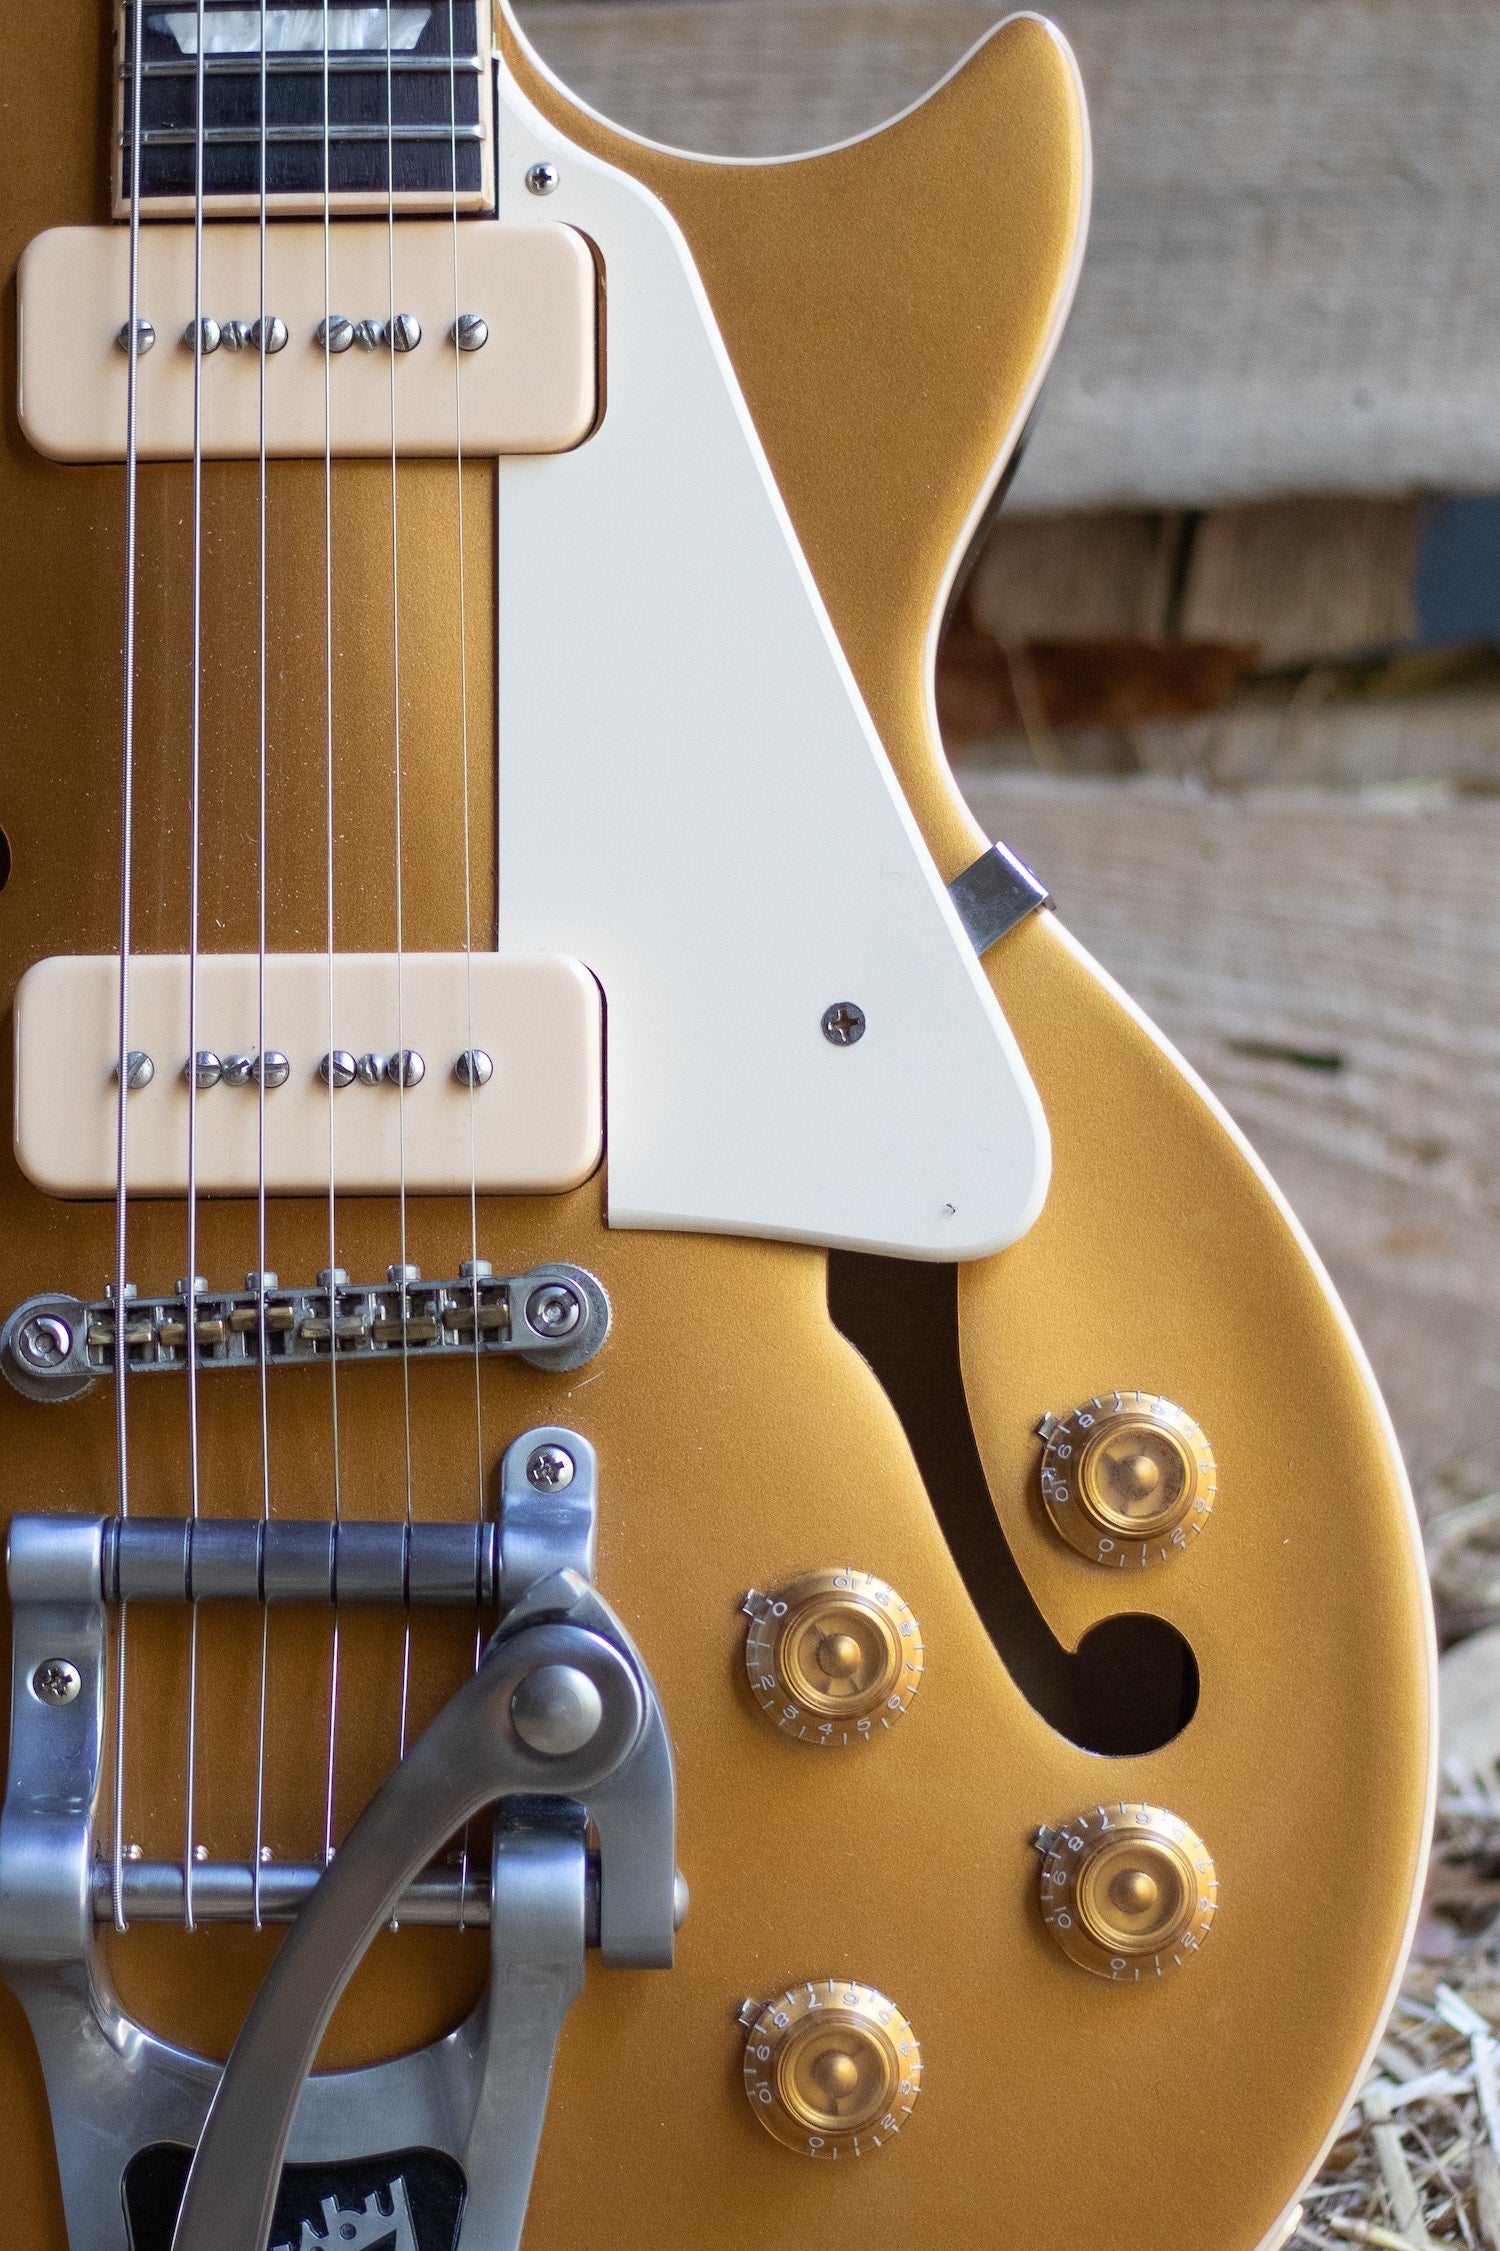 Guitar Refinishing Services: Nitro, Poly, Shellac & Oil finishes